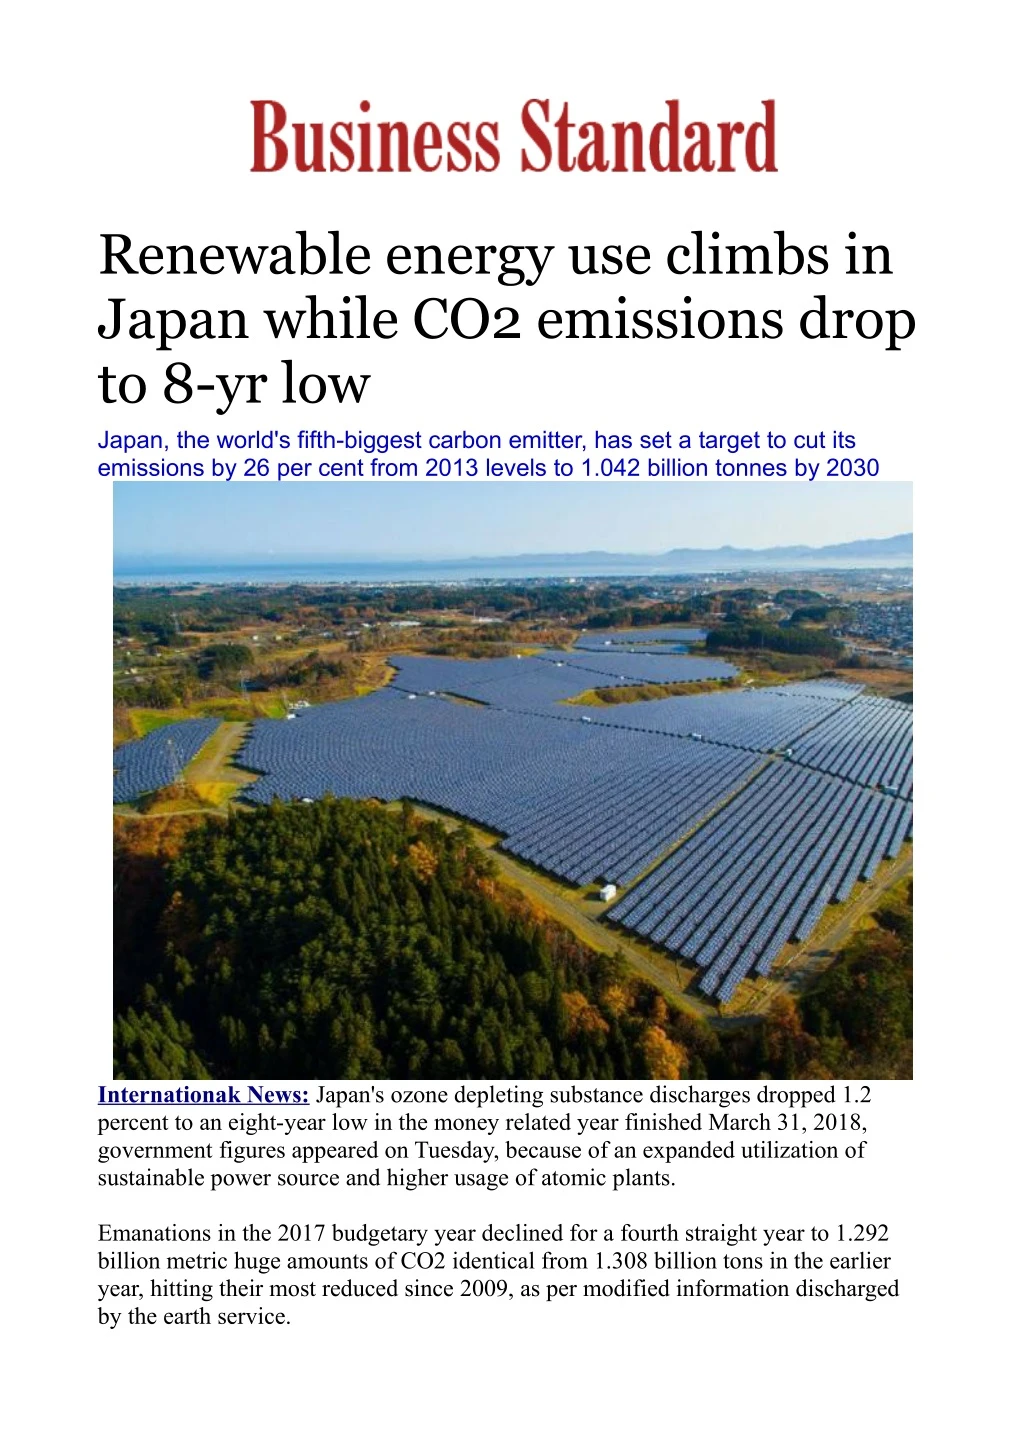 renewable energy use climbs in japan while